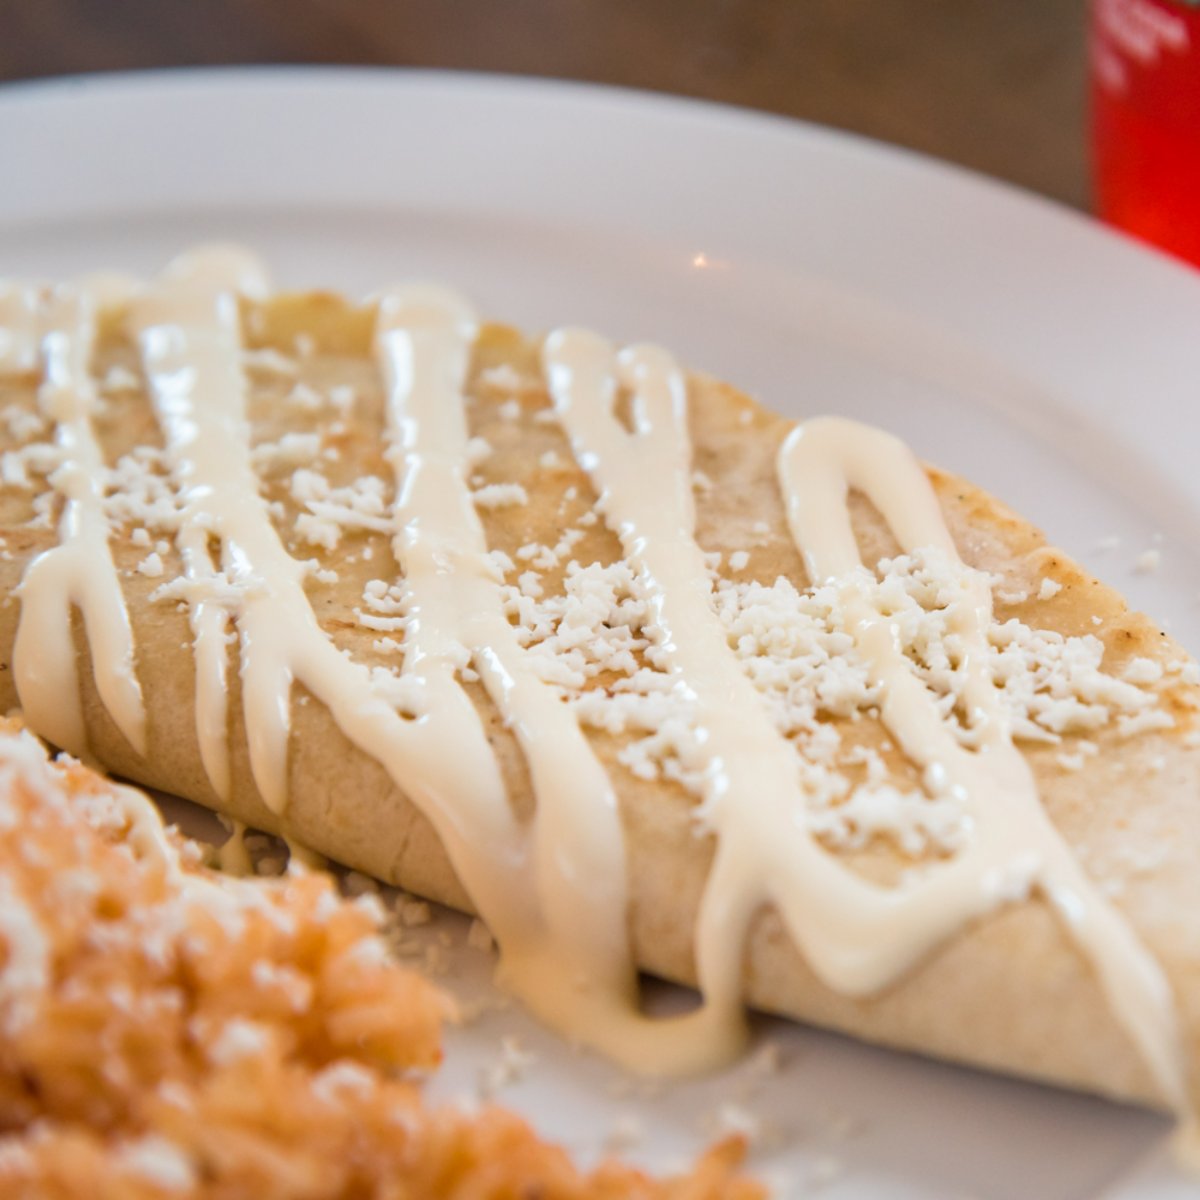 It's the most wonderful time of the year! Enjoy the gift of great food at #LunaYSolMexicanRestaurant.